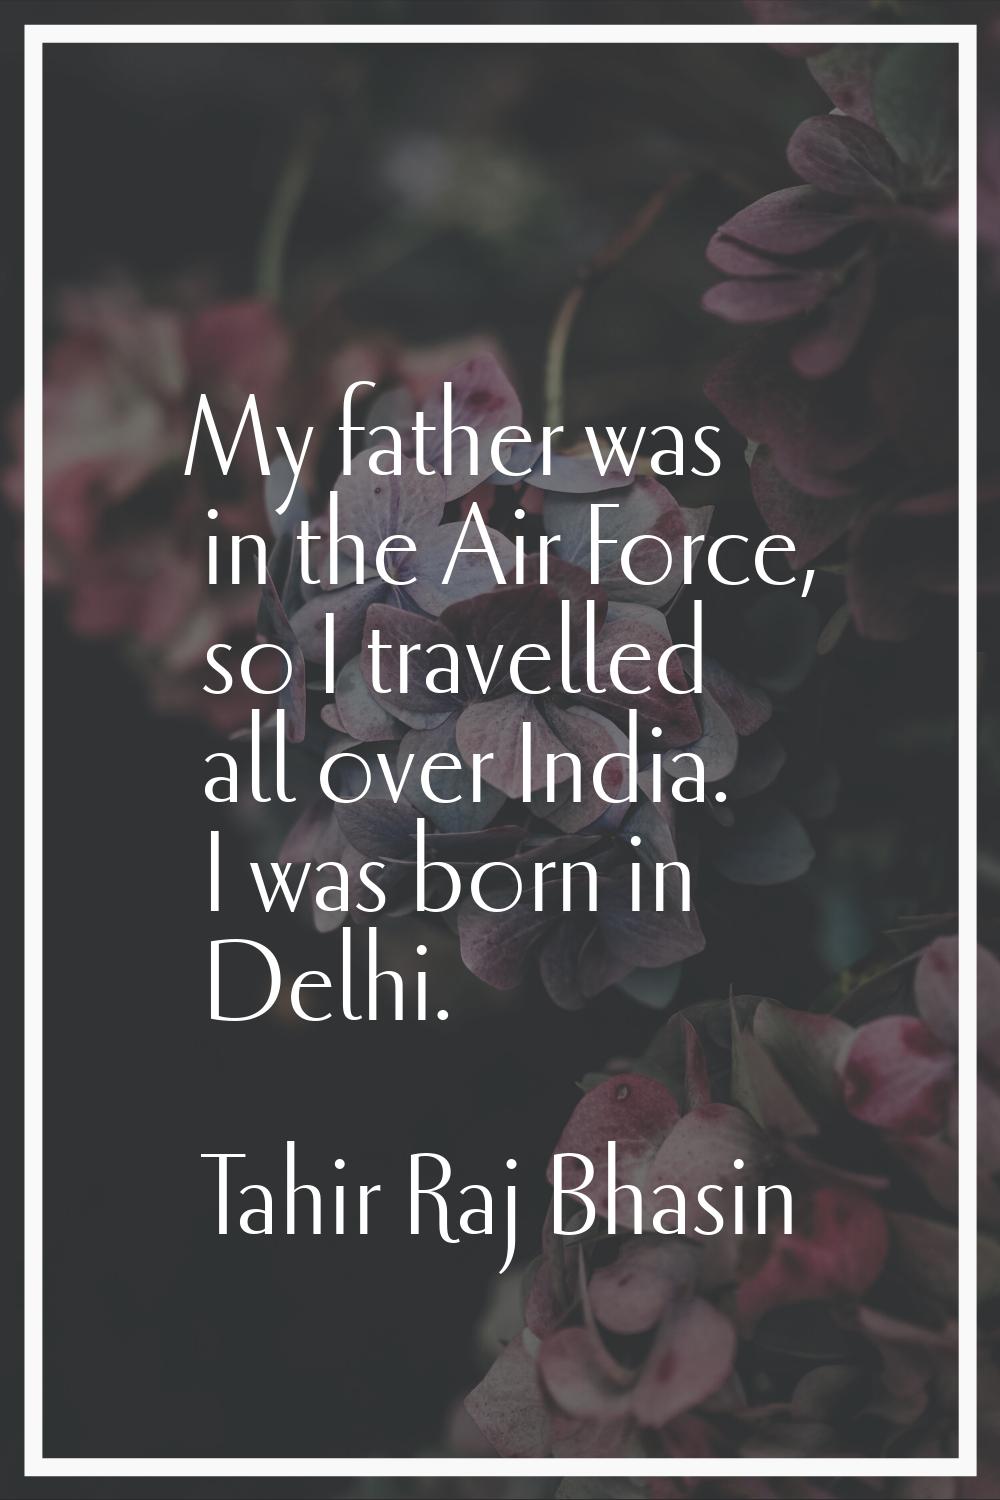 My father was in the Air Force, so I travelled all over India. I was born in Delhi.